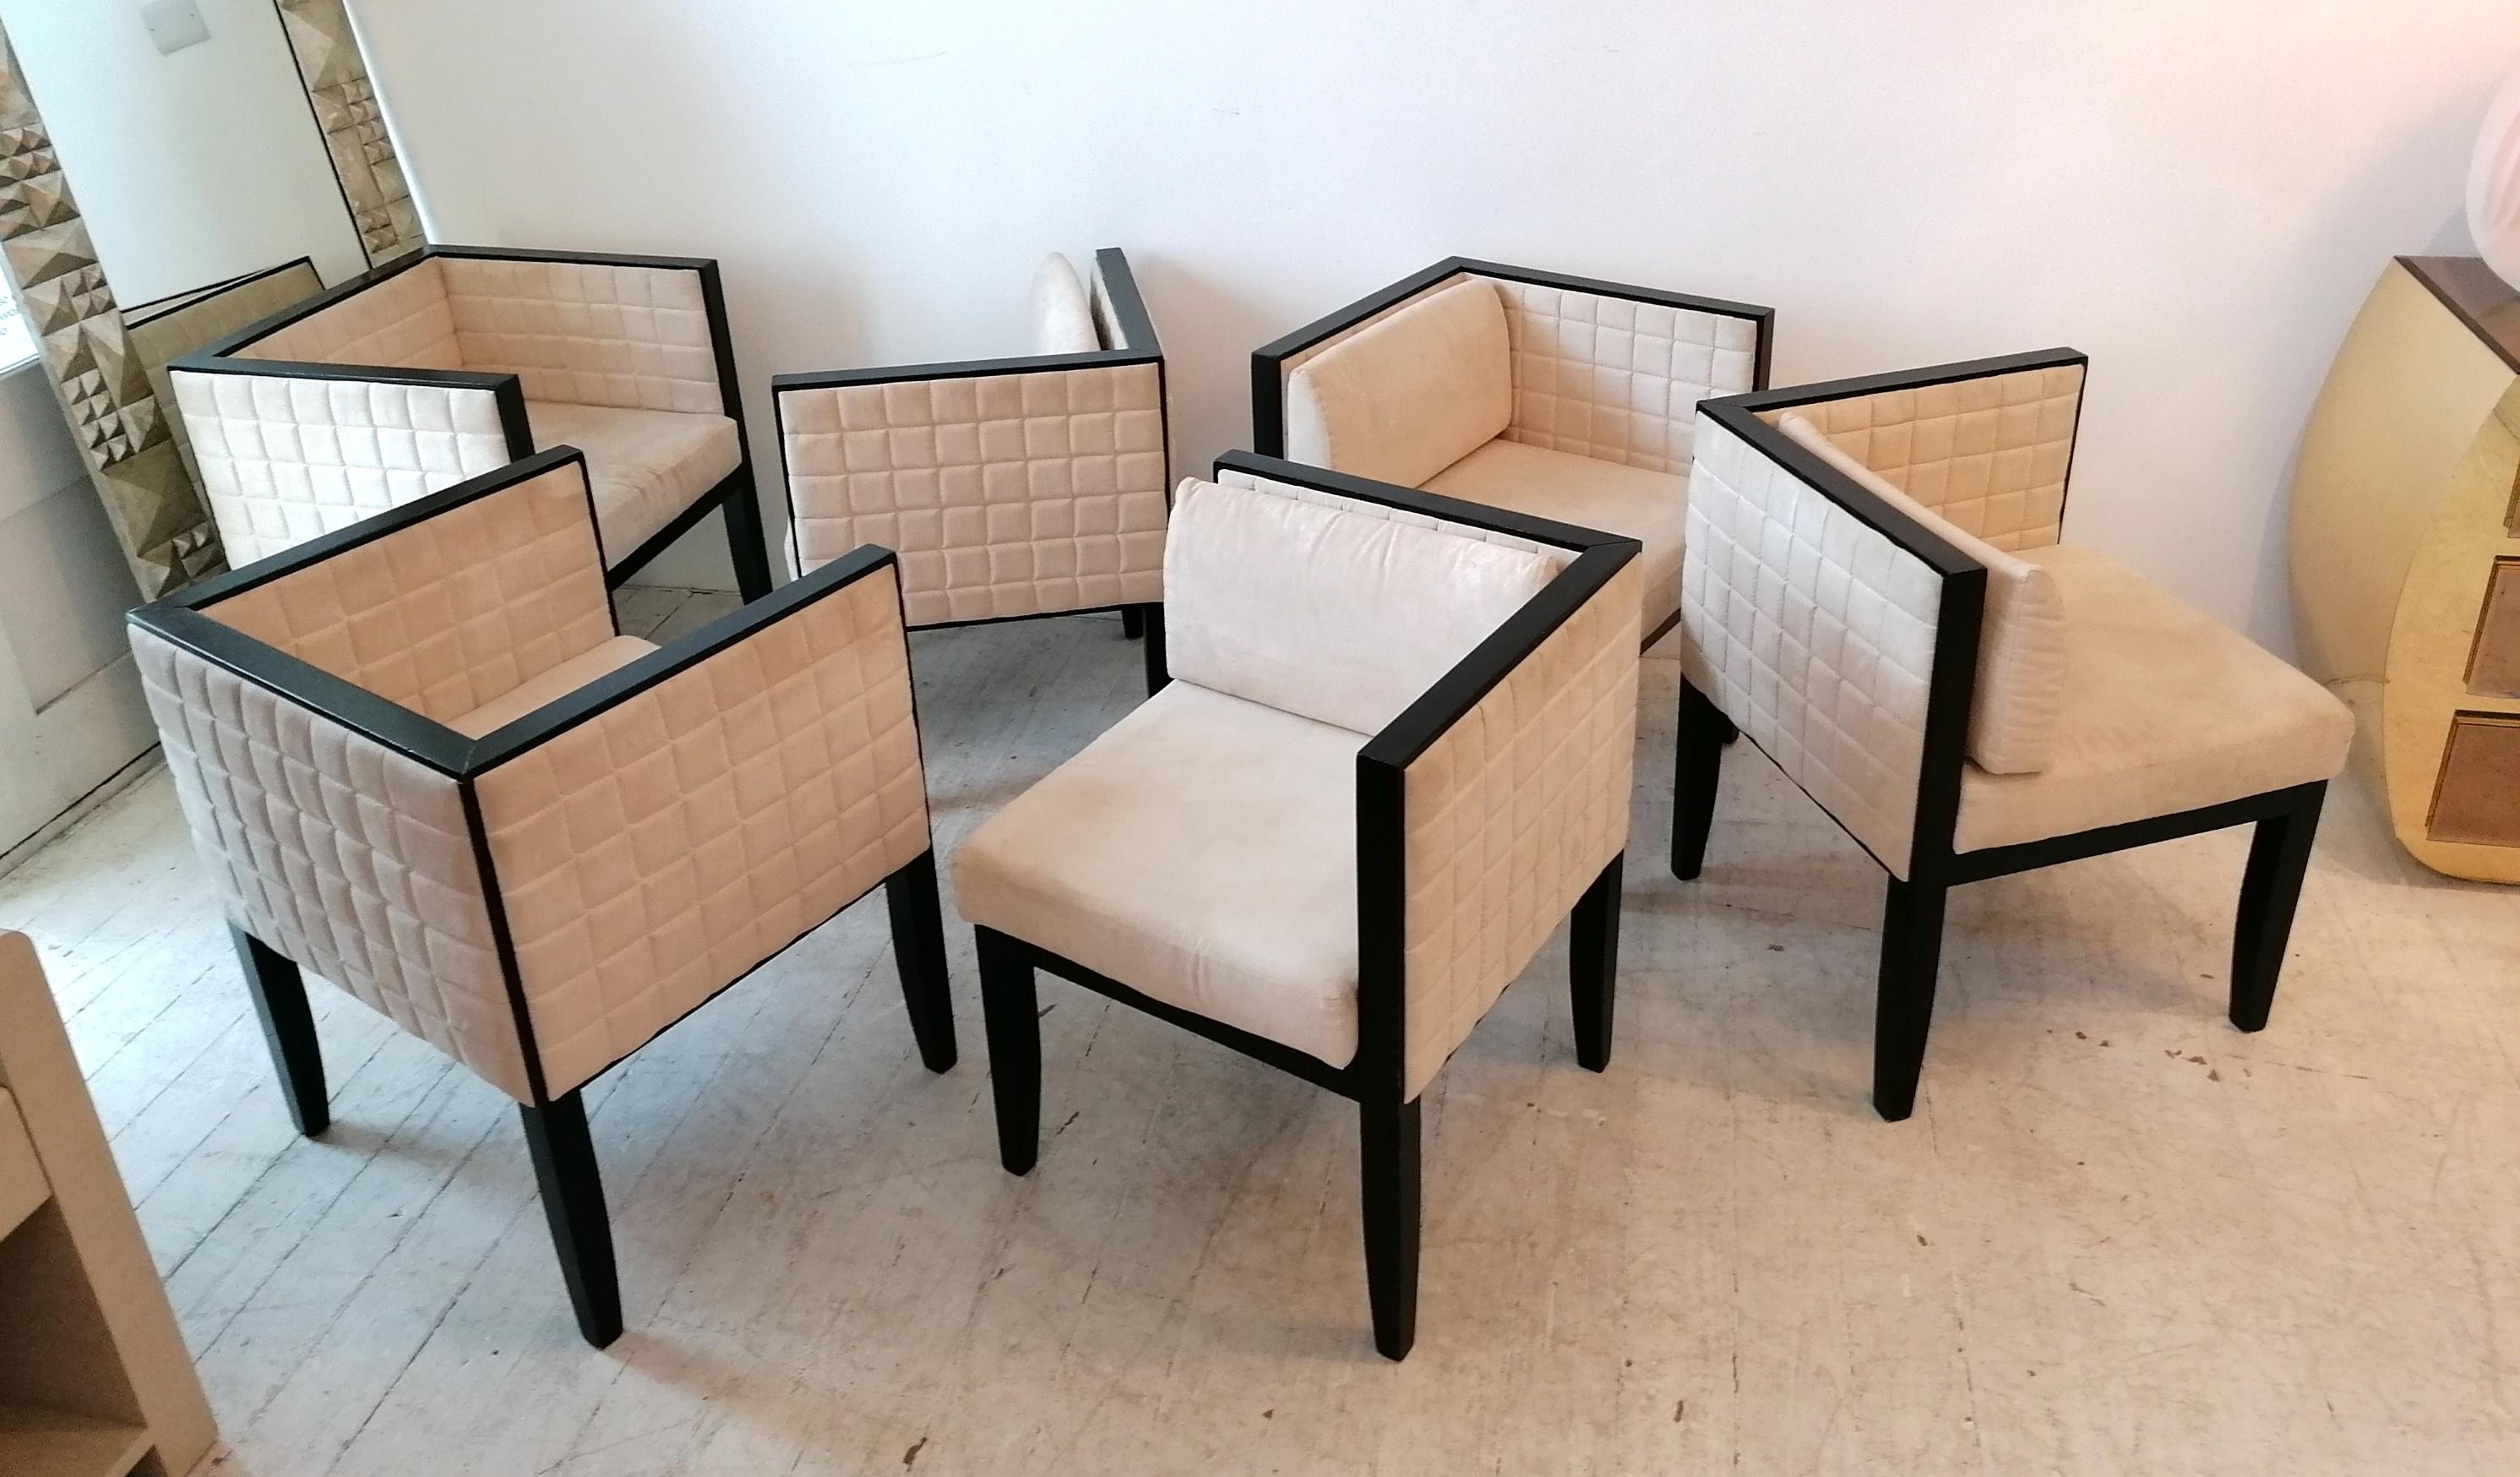 A rare set of 6 Yale chairs by Pietro Costantini, Italy, 1980s-1990s. Quilted ivory ultrasuede upholstery, black lacquer frames. The set comprises 2 armchairs and 4 corner chairs (with movable back cushions).
Very Josef Hoffman in style.
Fabric